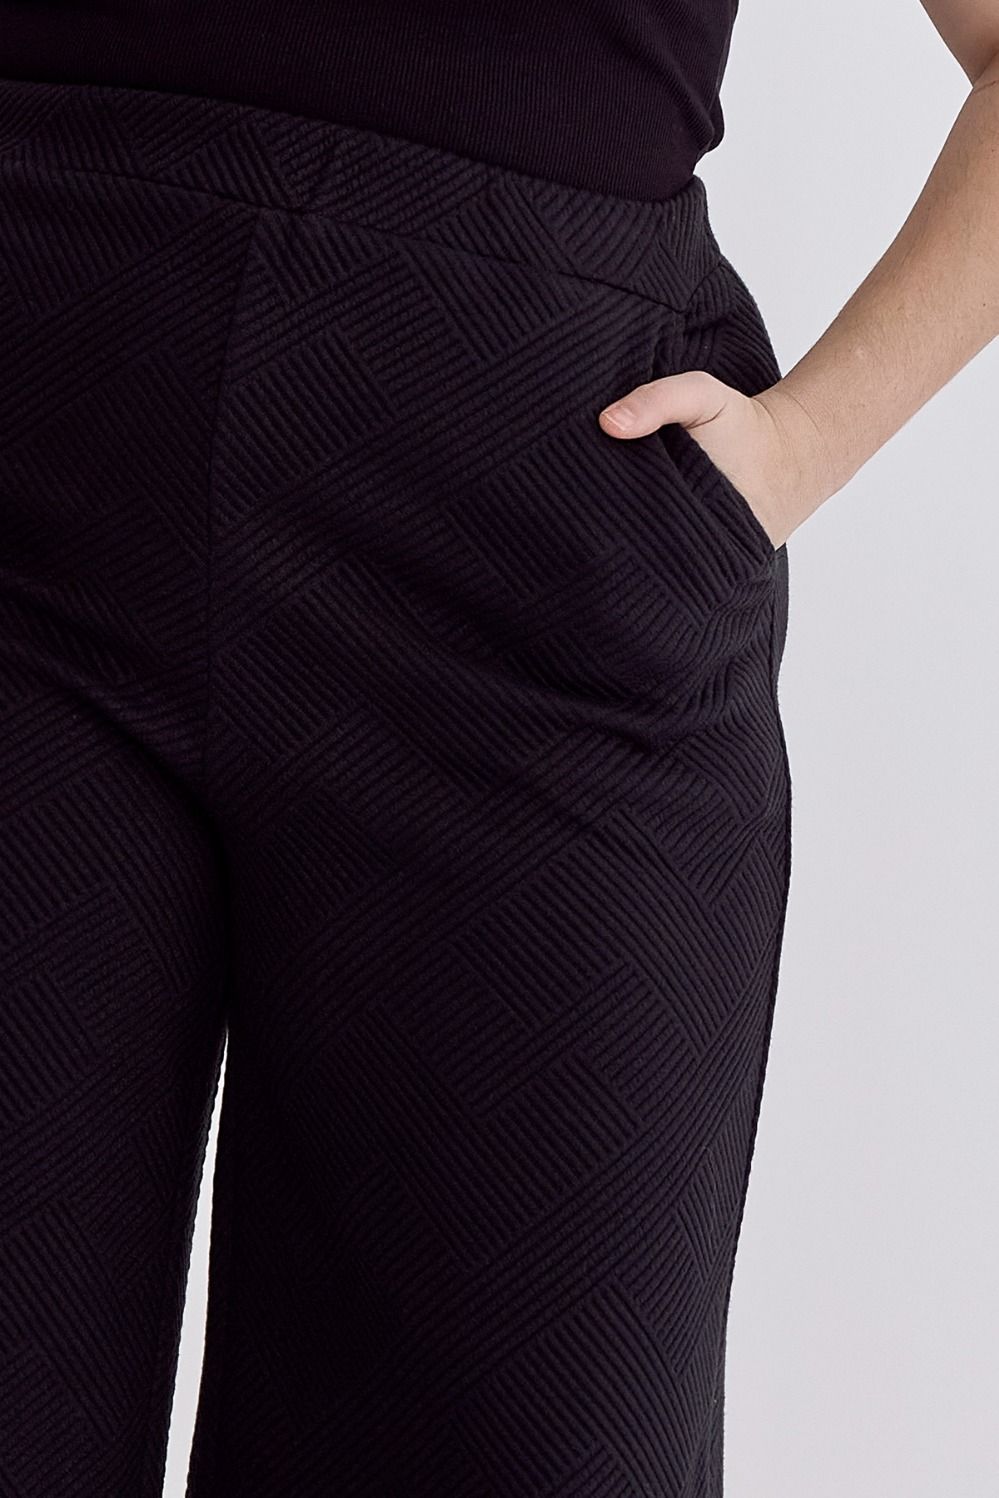 Textured High Waist Pull-On Cropped Pants